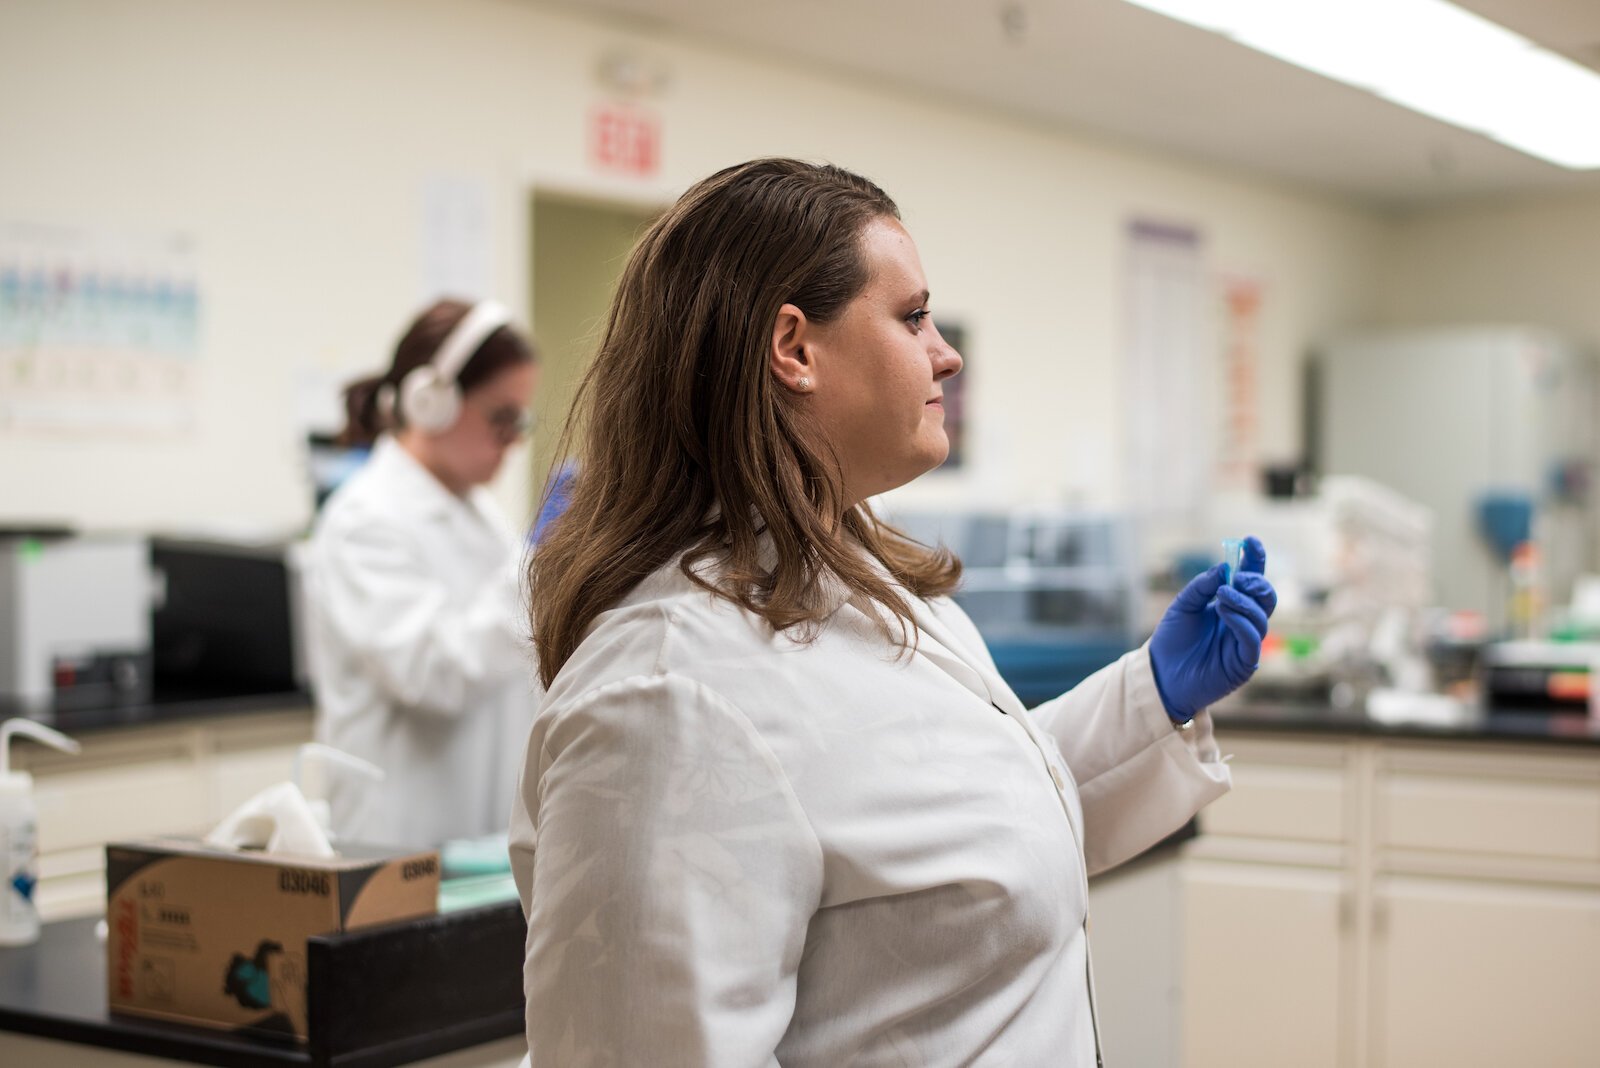 Stephanie Wheeler, clinical testing specialist at Genemarkers in Kalamazoo, displays a sample tube in one of the business’s lab rooms. Lab workers use the tubes to separate and clean DNA samples in preparation for a genetic testing process.